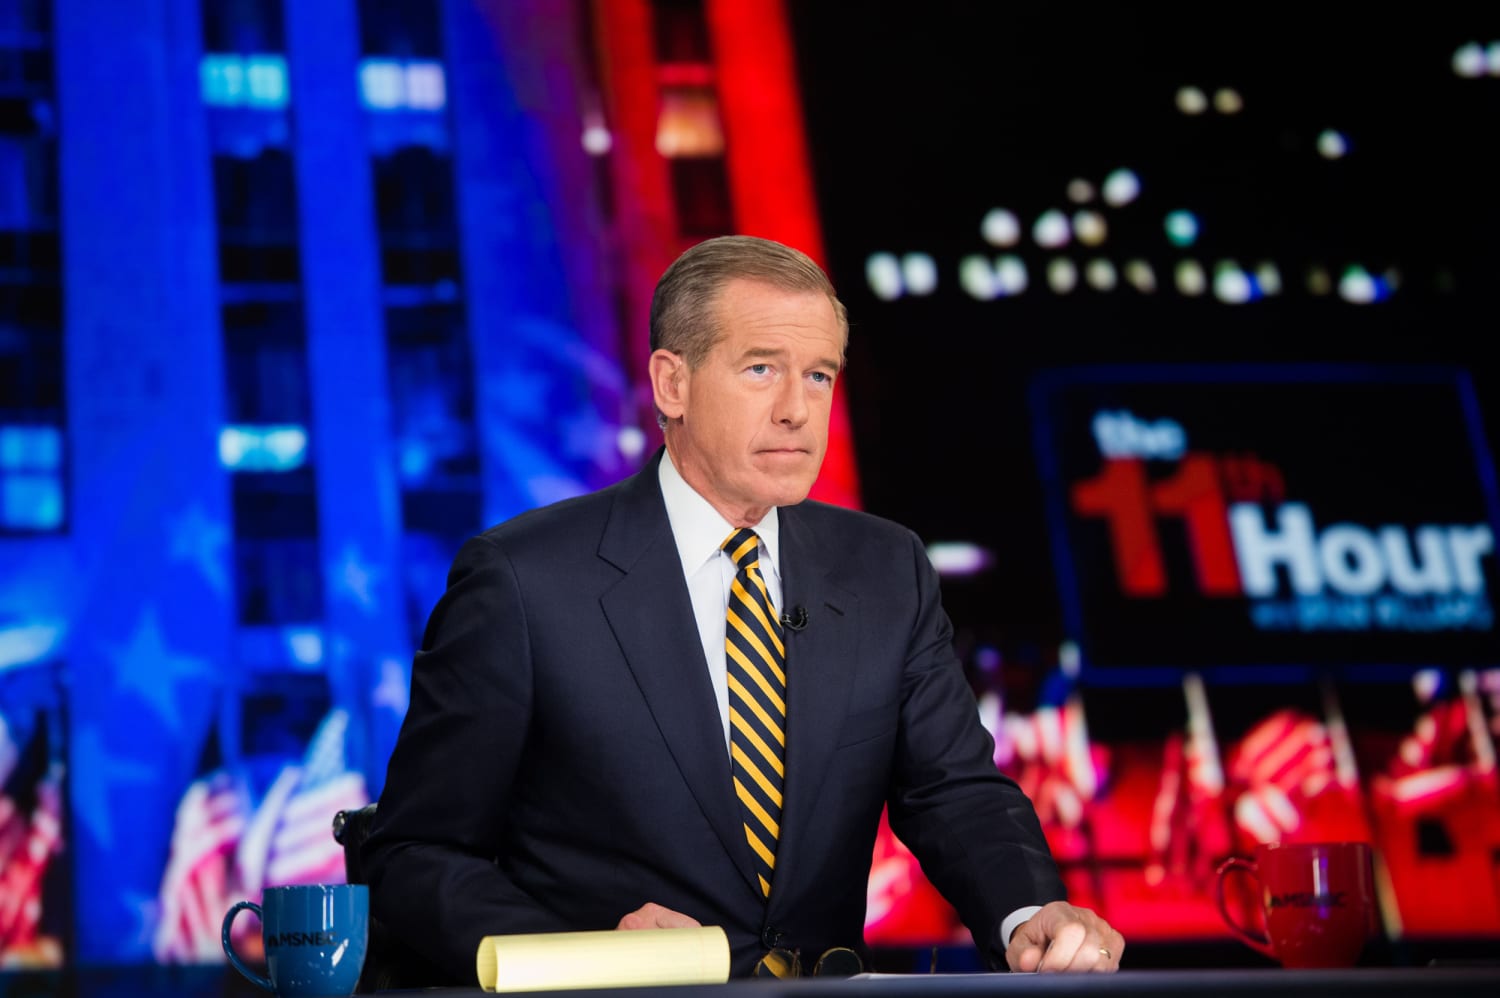 Brian Williams signs off from NBC after 28 years